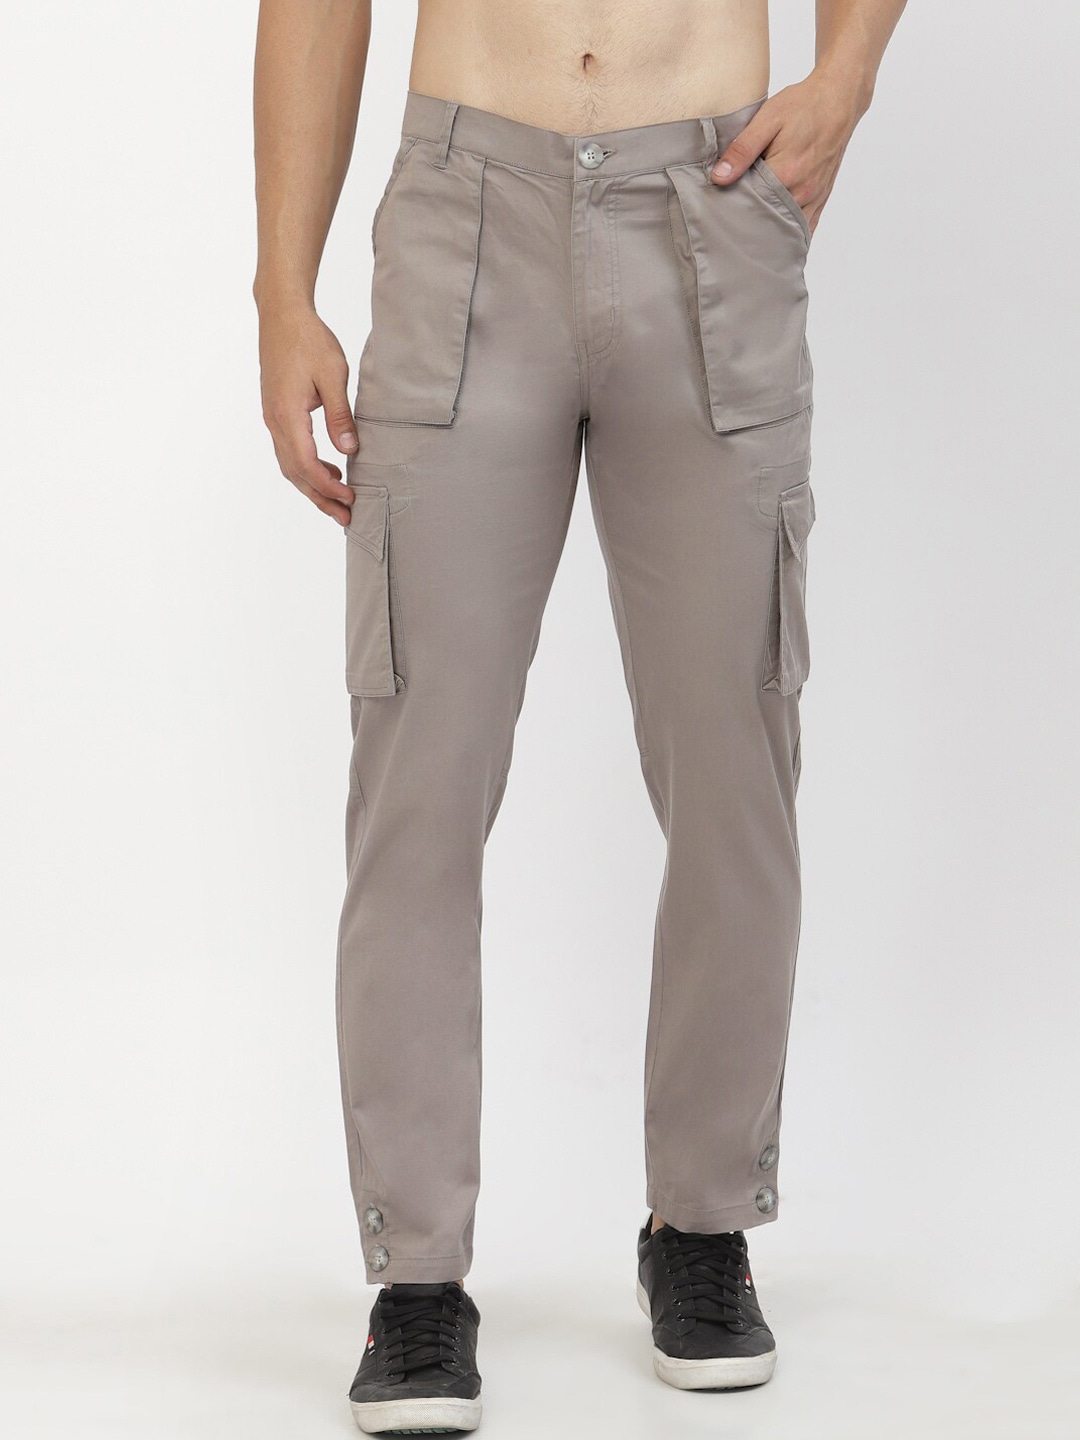 19 Pairs of Beige Trousers You Can Style Hundreds of Ways  Who What Wear